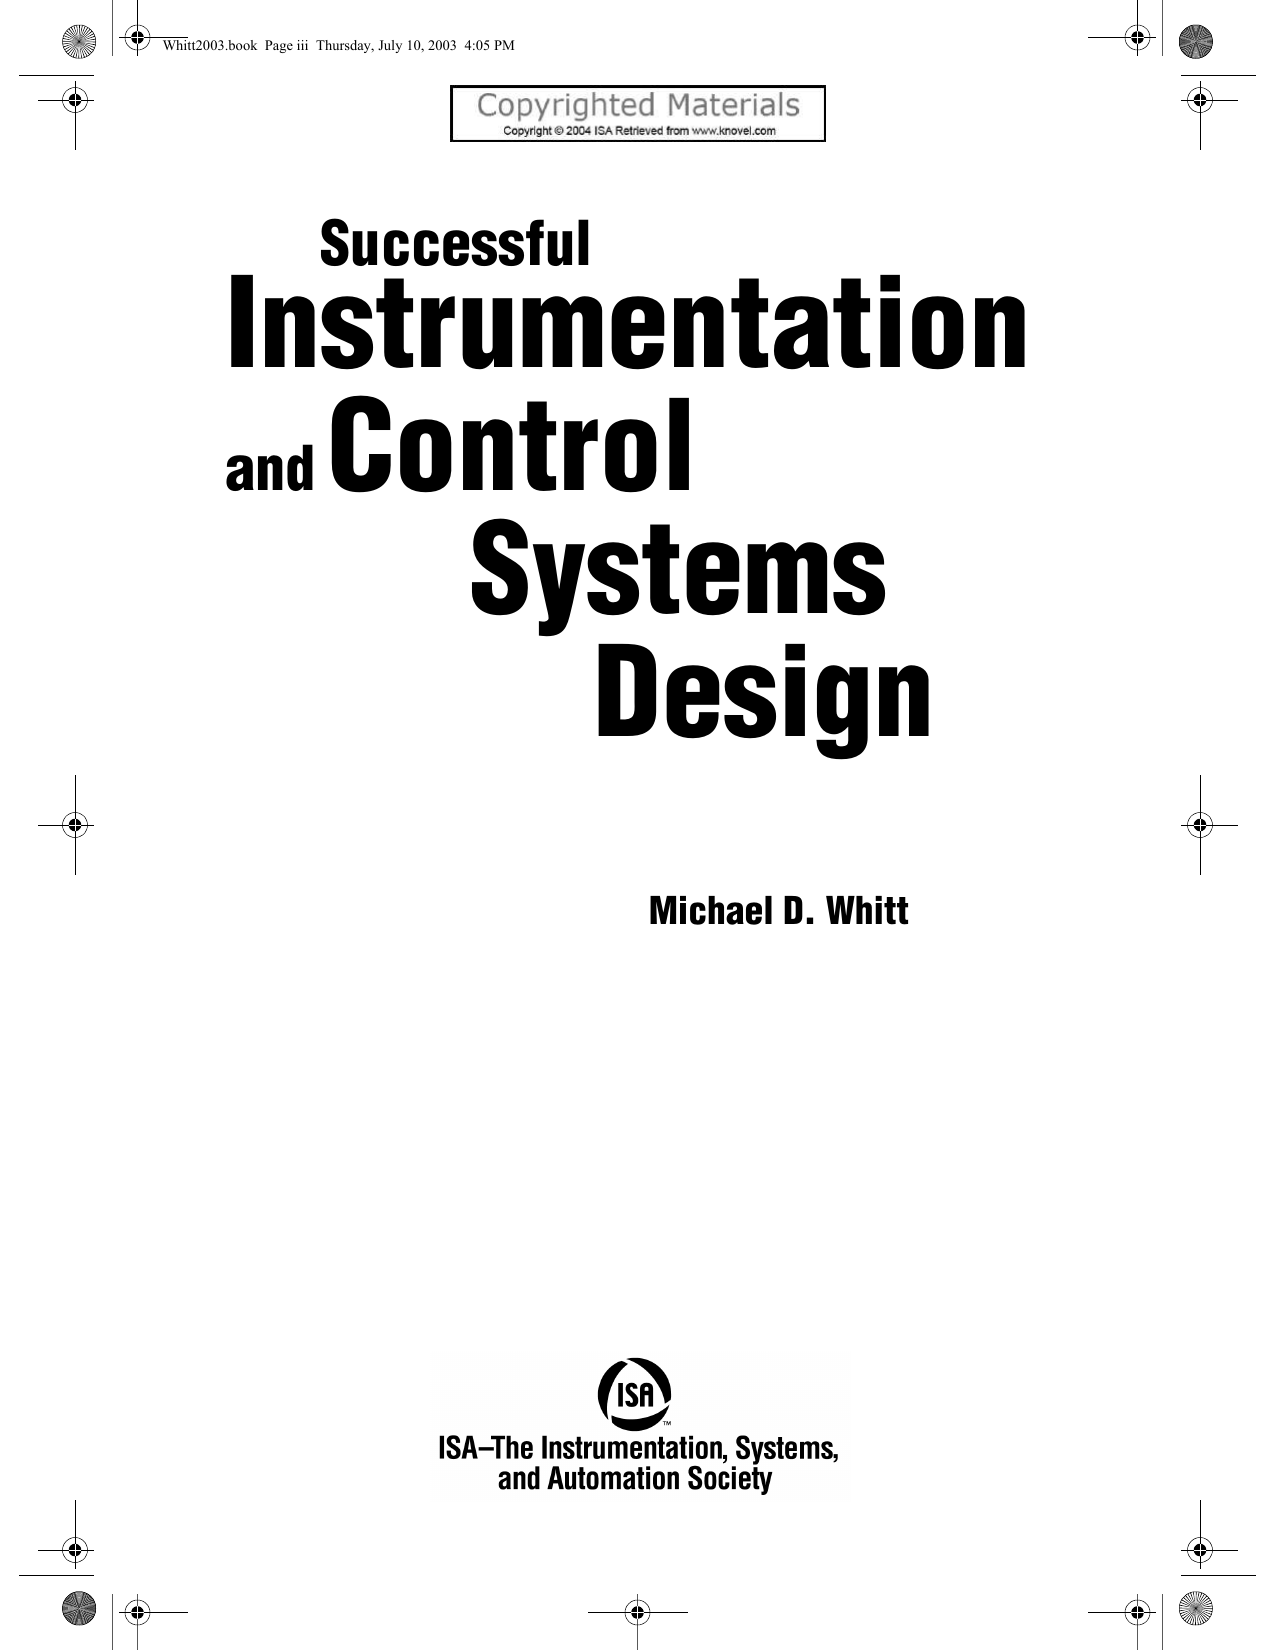 Successful Instrumentation and Control Systems Design